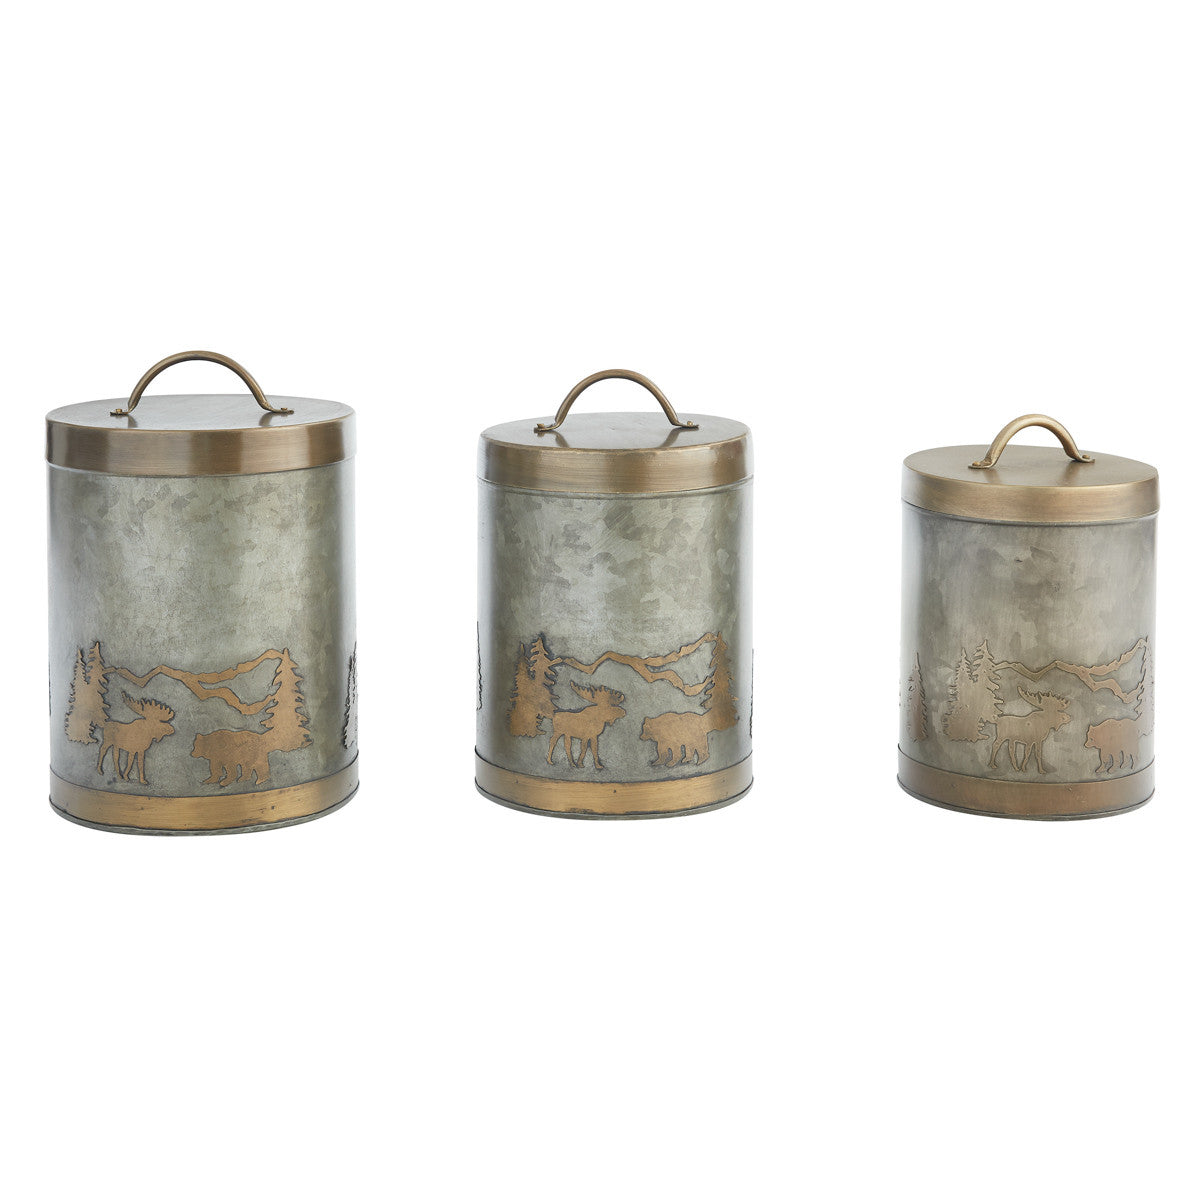 Forester's Canisters - Set Of 3 - Park Designs